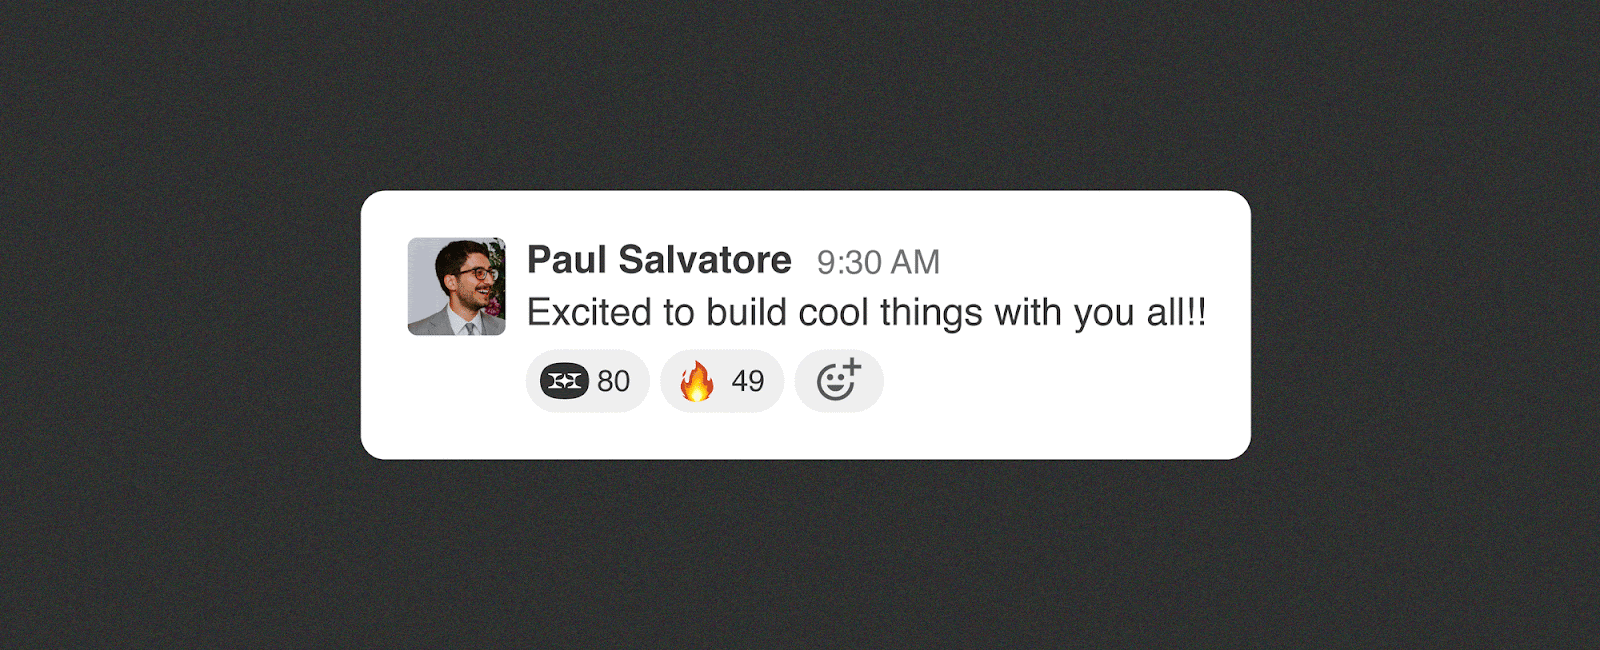 A GIF showing an illustrated version of a Slack message from Paul Salvatore on a dark gray background. The message says, “Excited to build cool things with you all!!” which has 80 Hack Week emoji and 49 fire emoji responses.